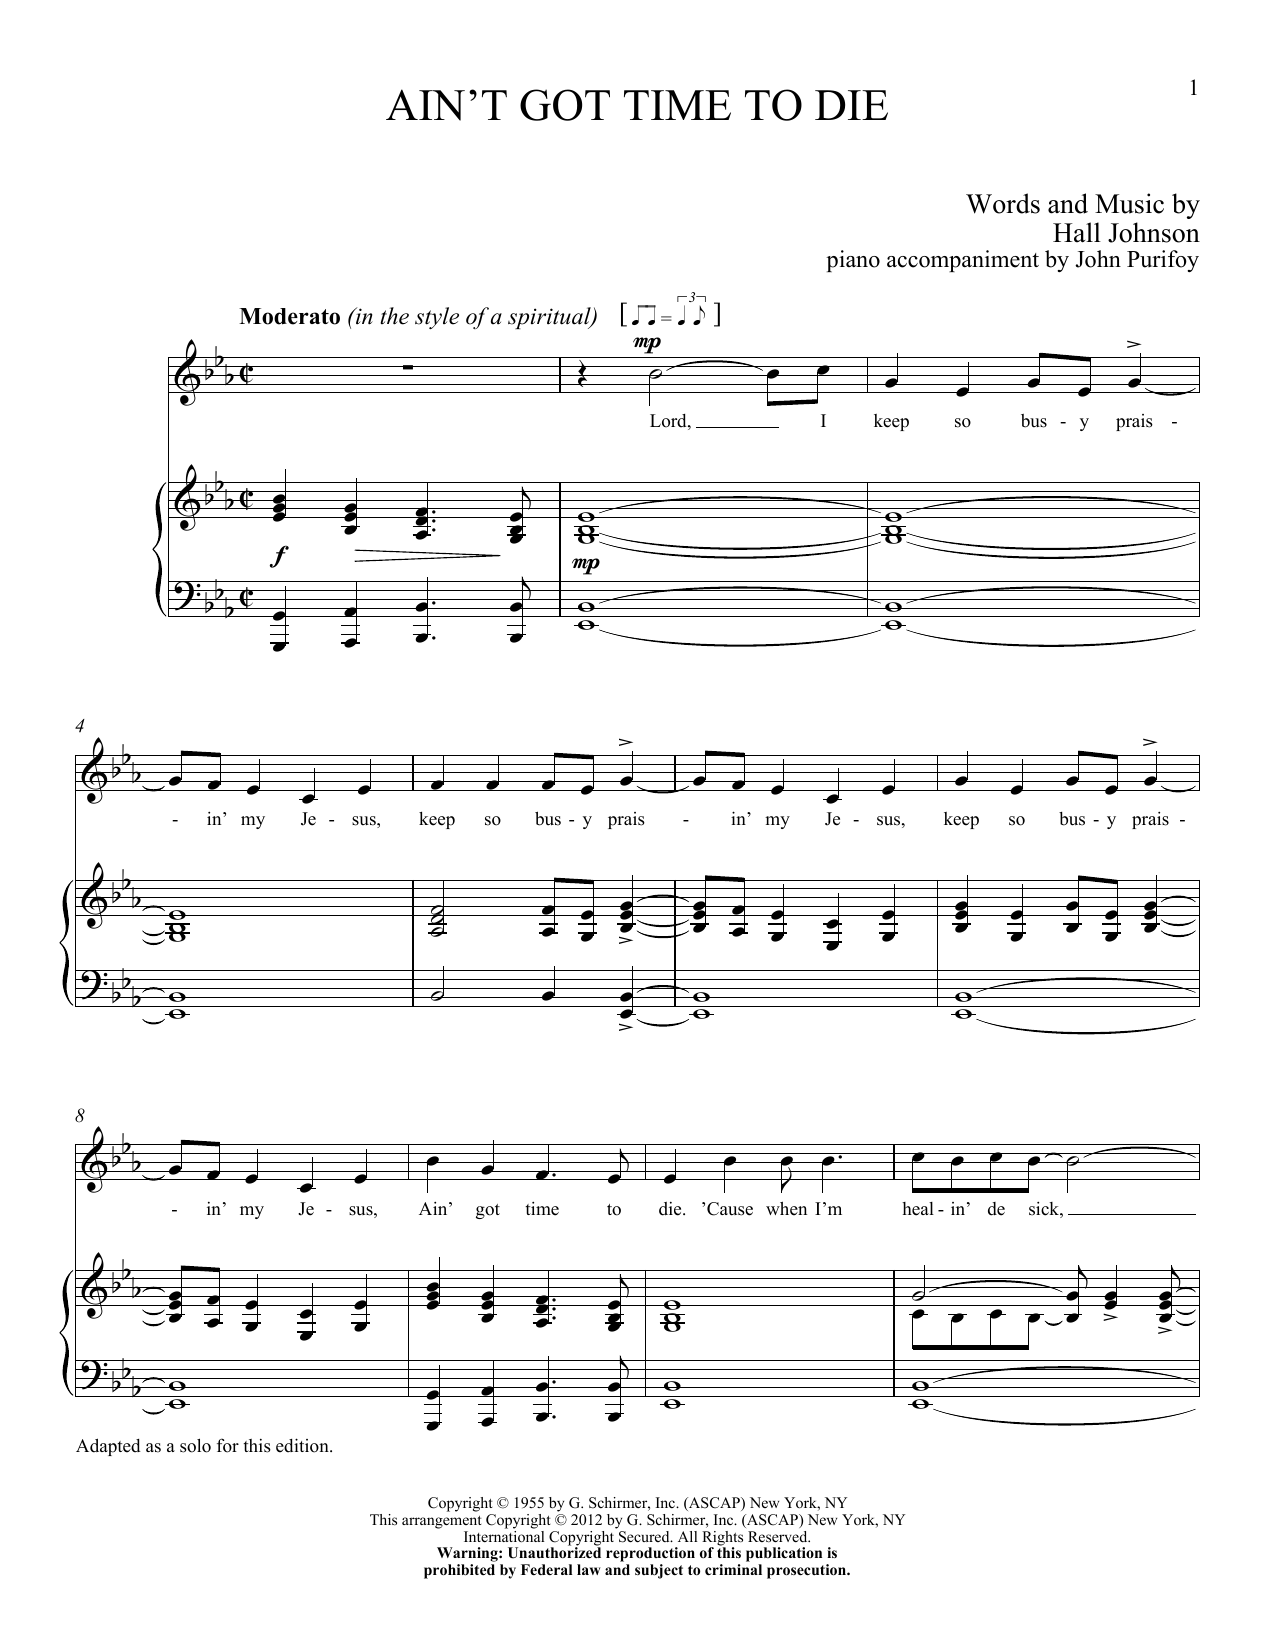 Download Hall Johnson Ain't Got Time to Die Sheet Music